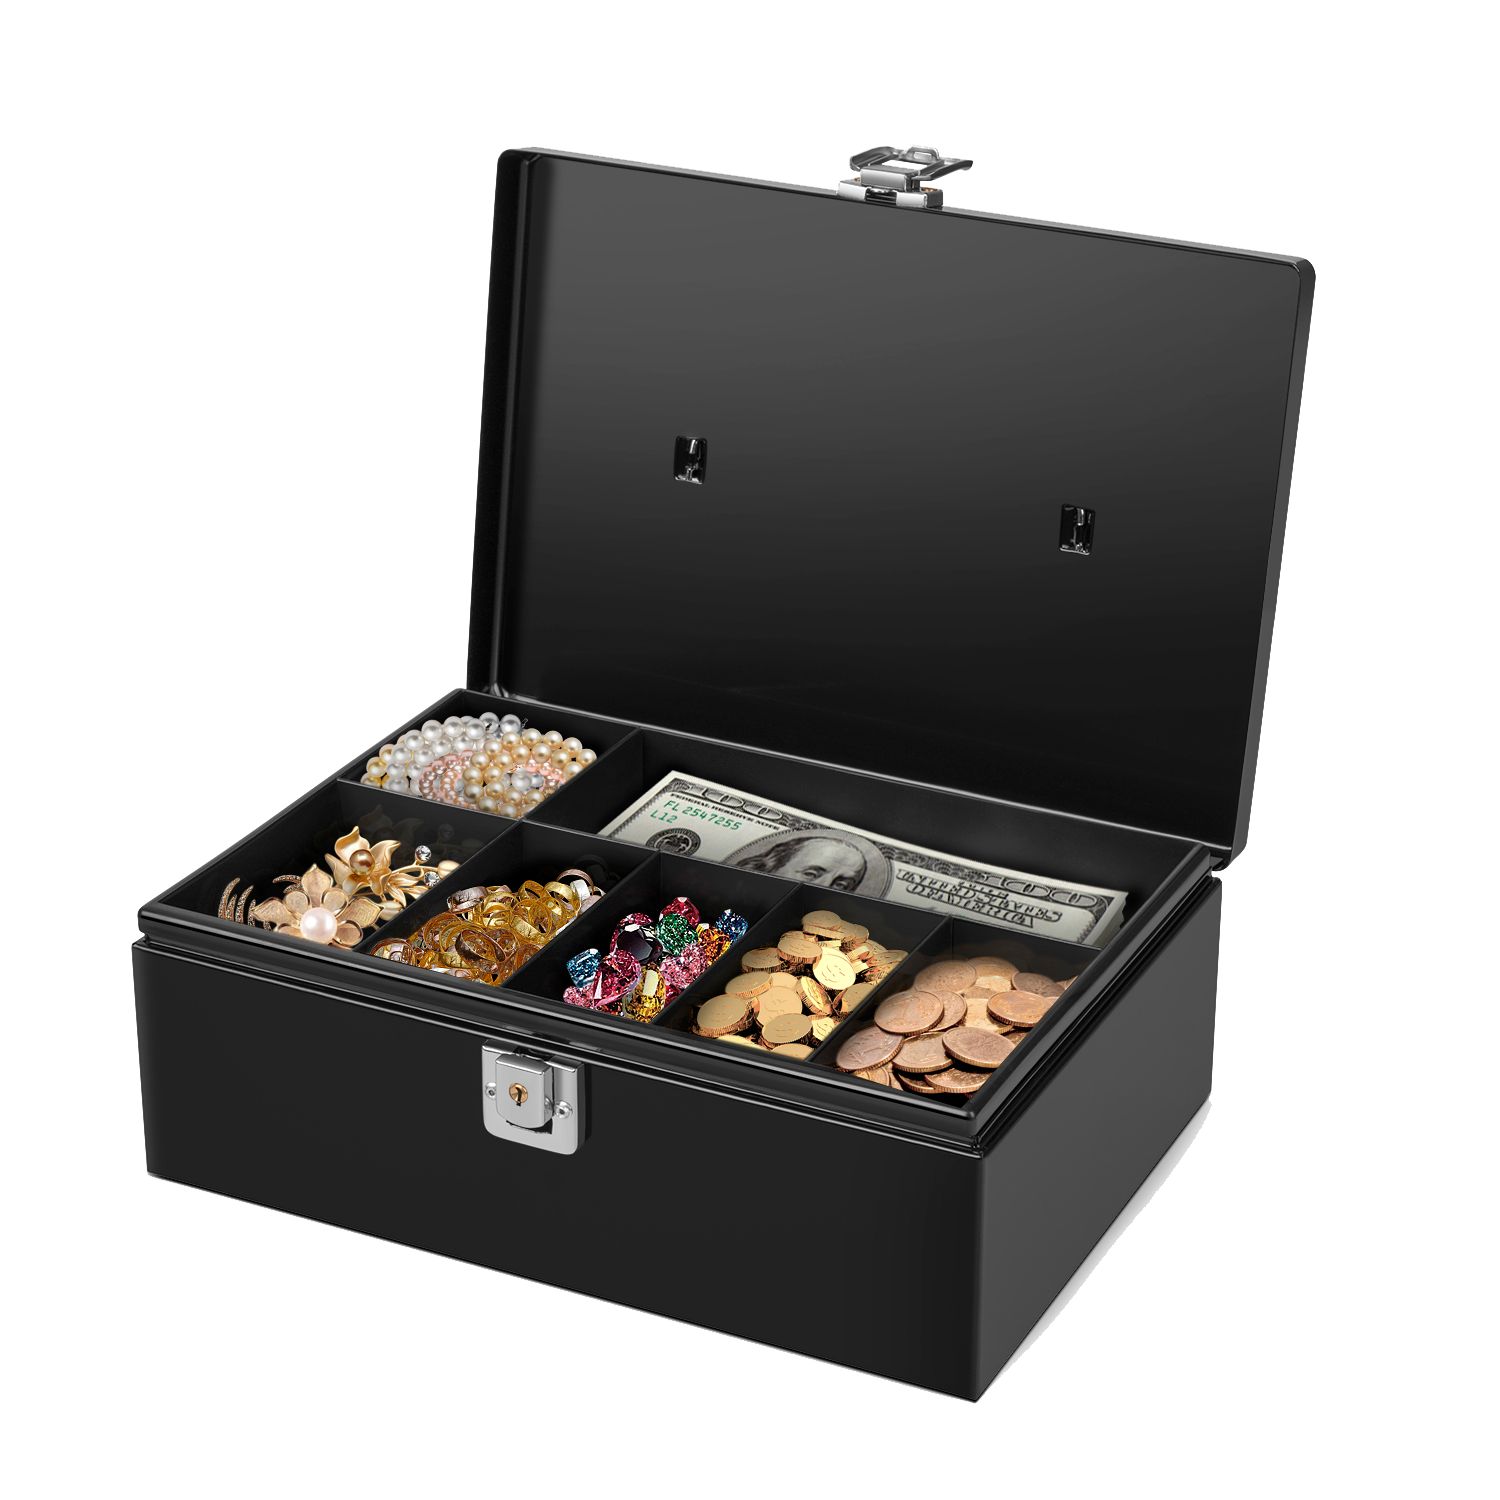 Cash Box with Money Tray Lock latch Steel for Cashier Drawer Money Safe